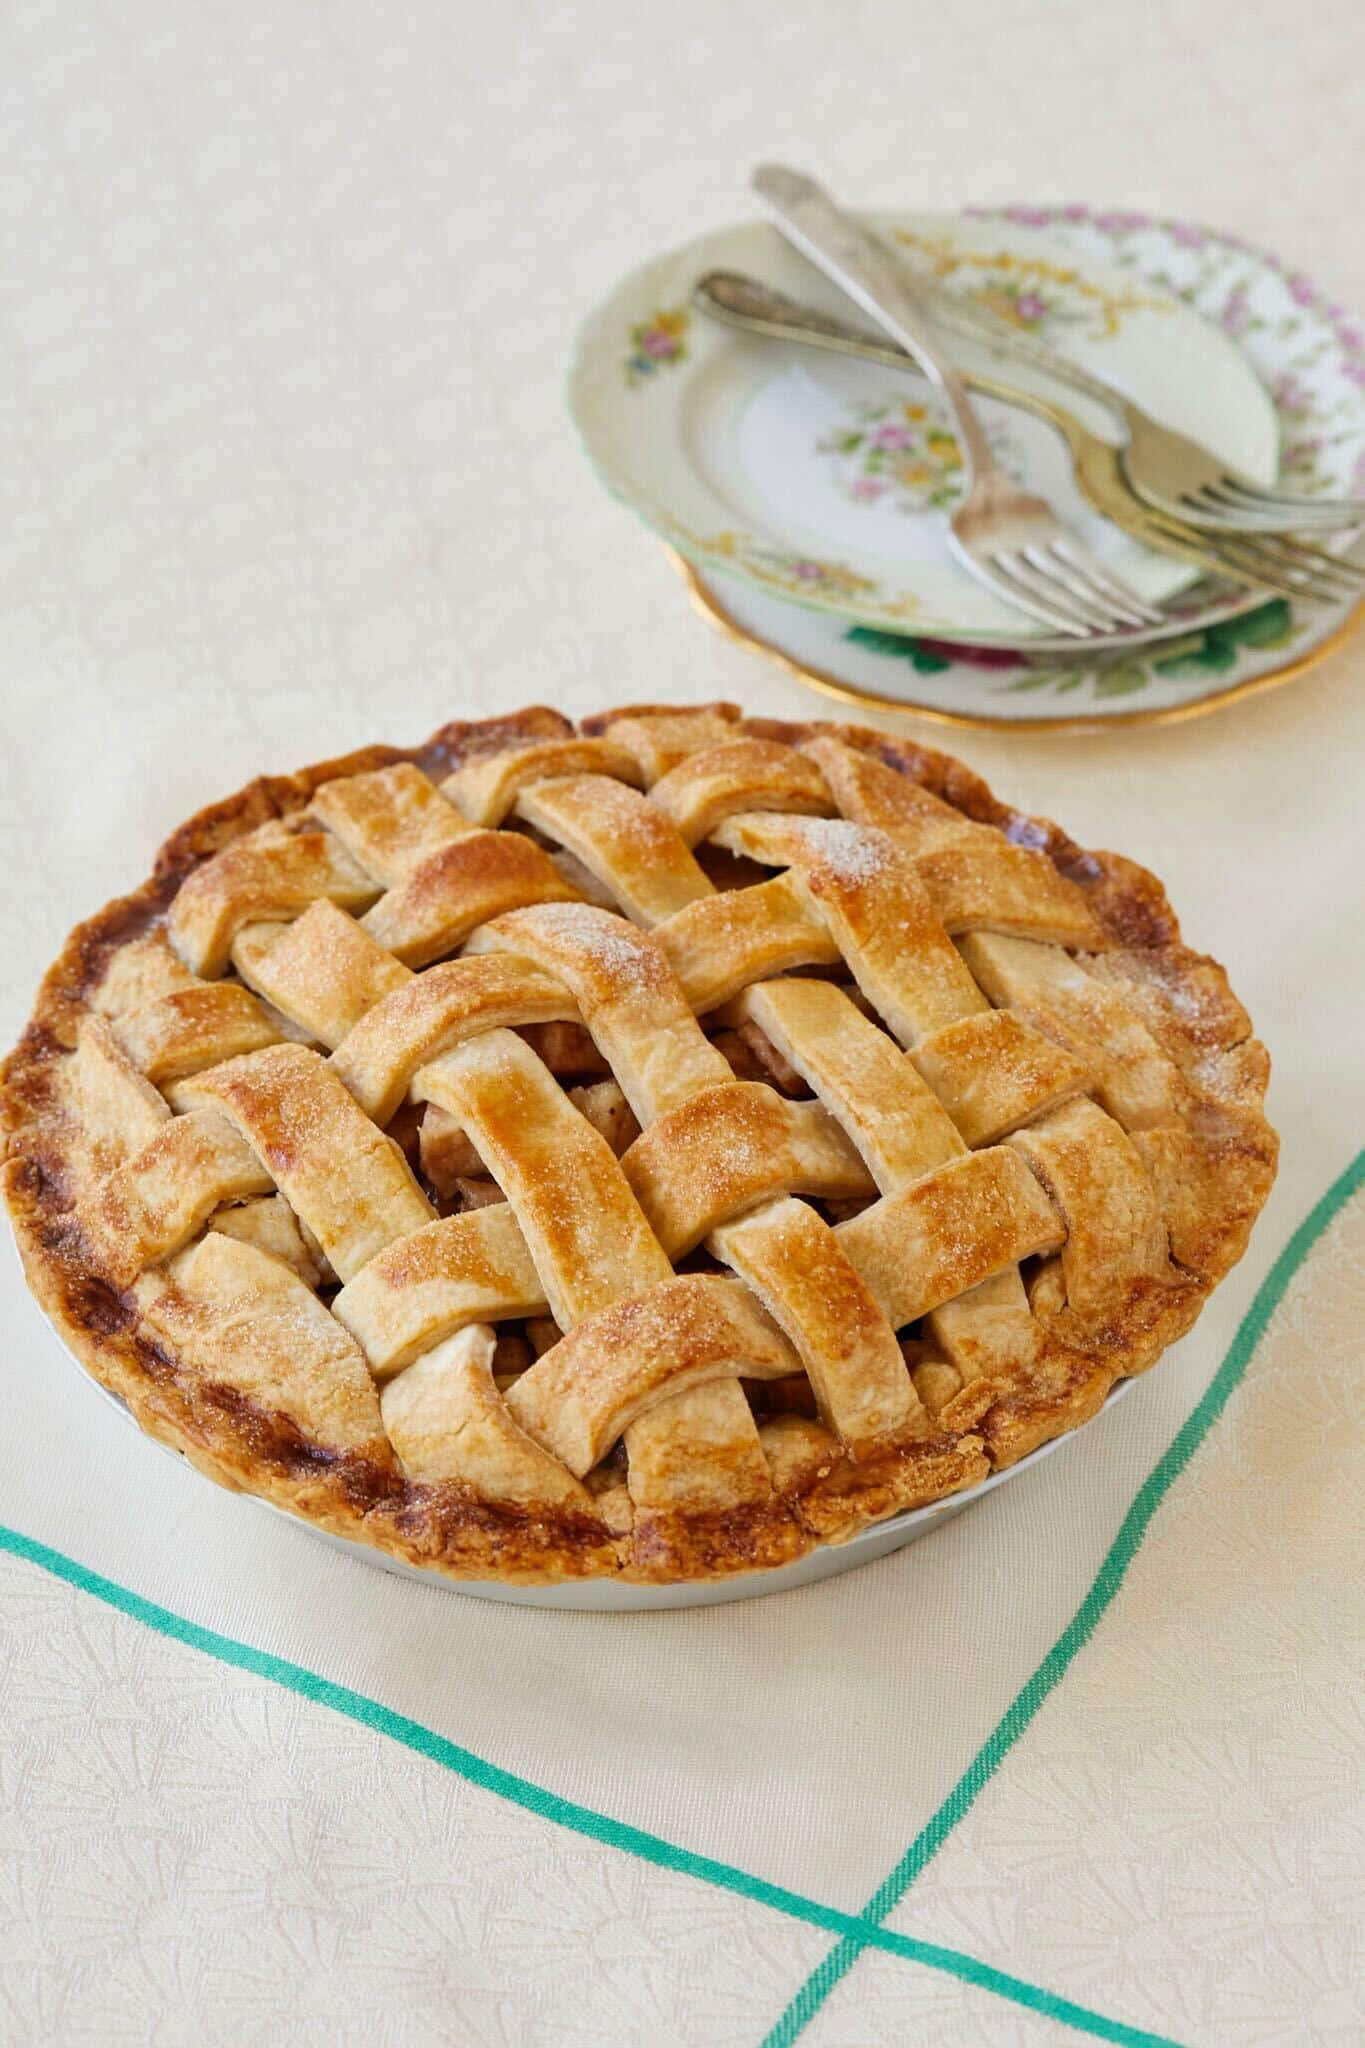 The Flaky and Easy Pear Pie is baked perfectly golden brown all round the edges and the lacie topping. Two floral dessert plates and three forks are on the side. 